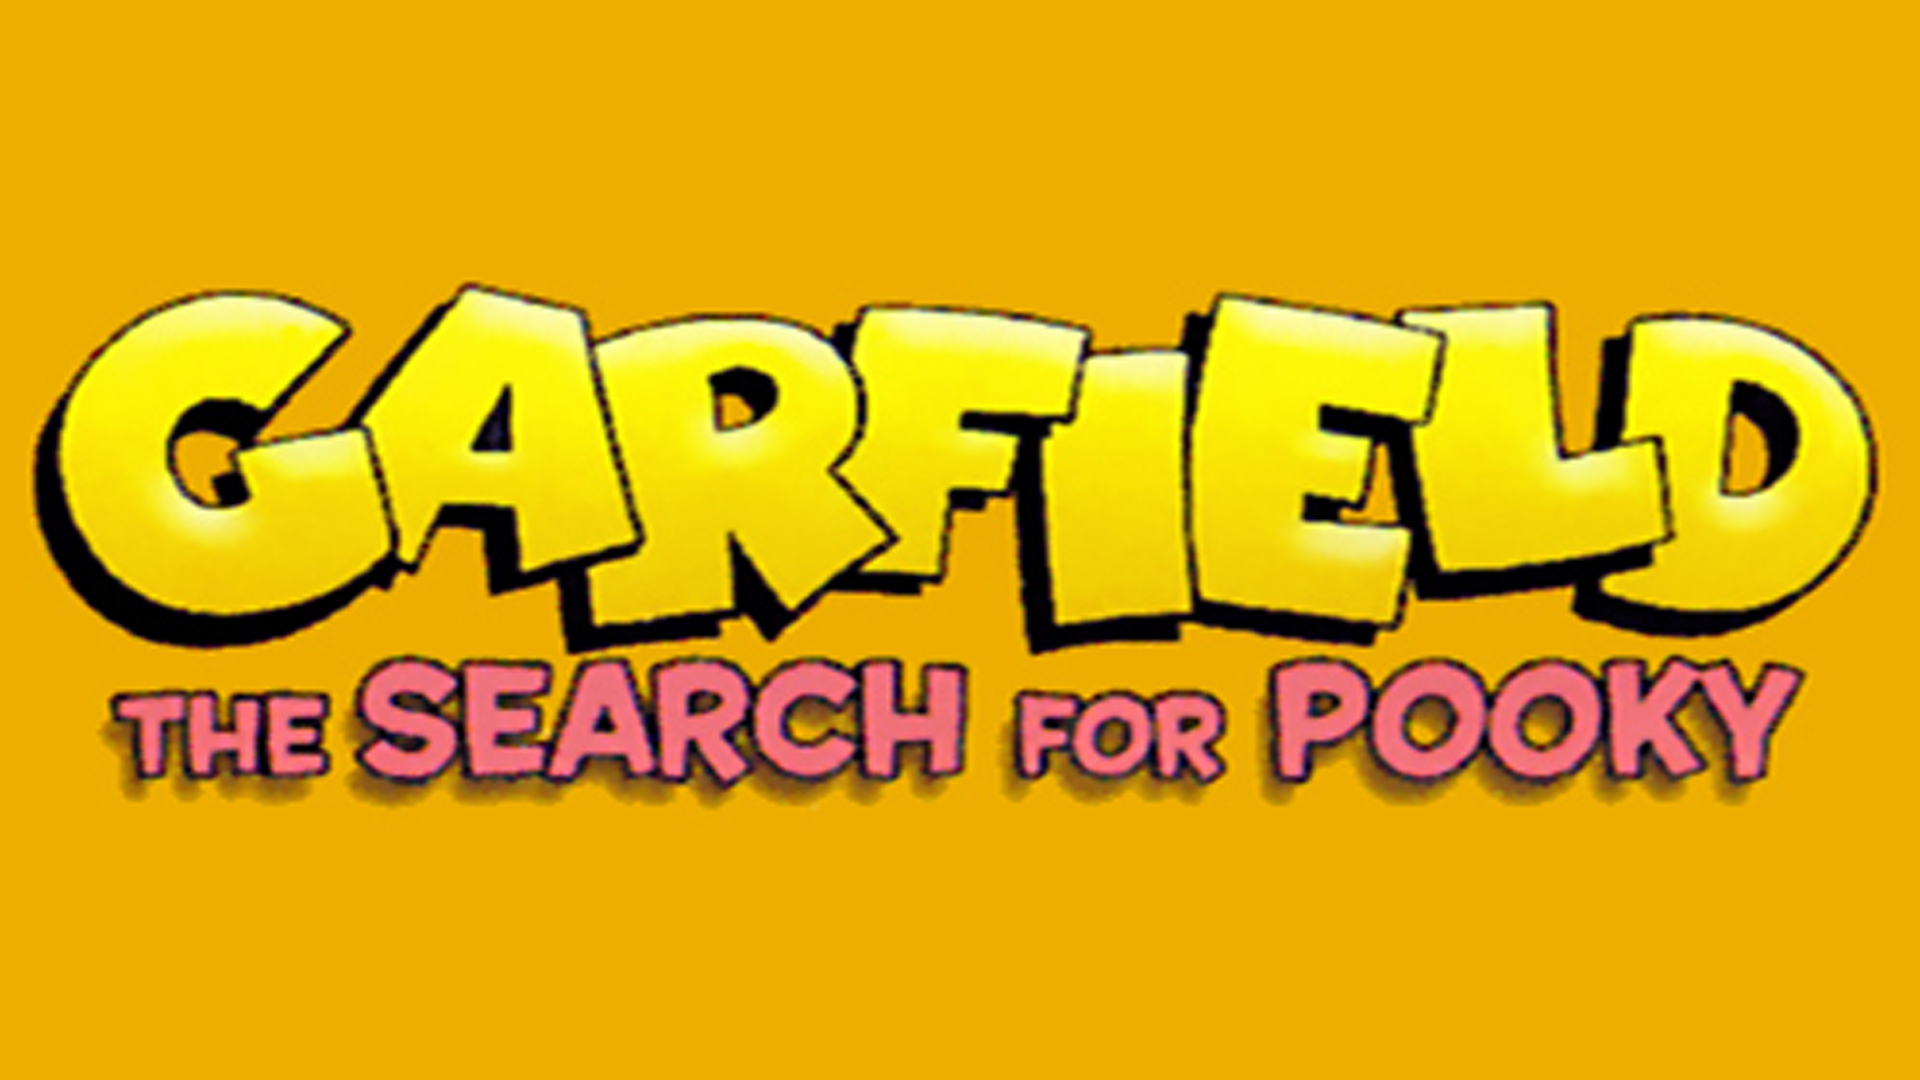 Garfield: The Search for Pooky Logo